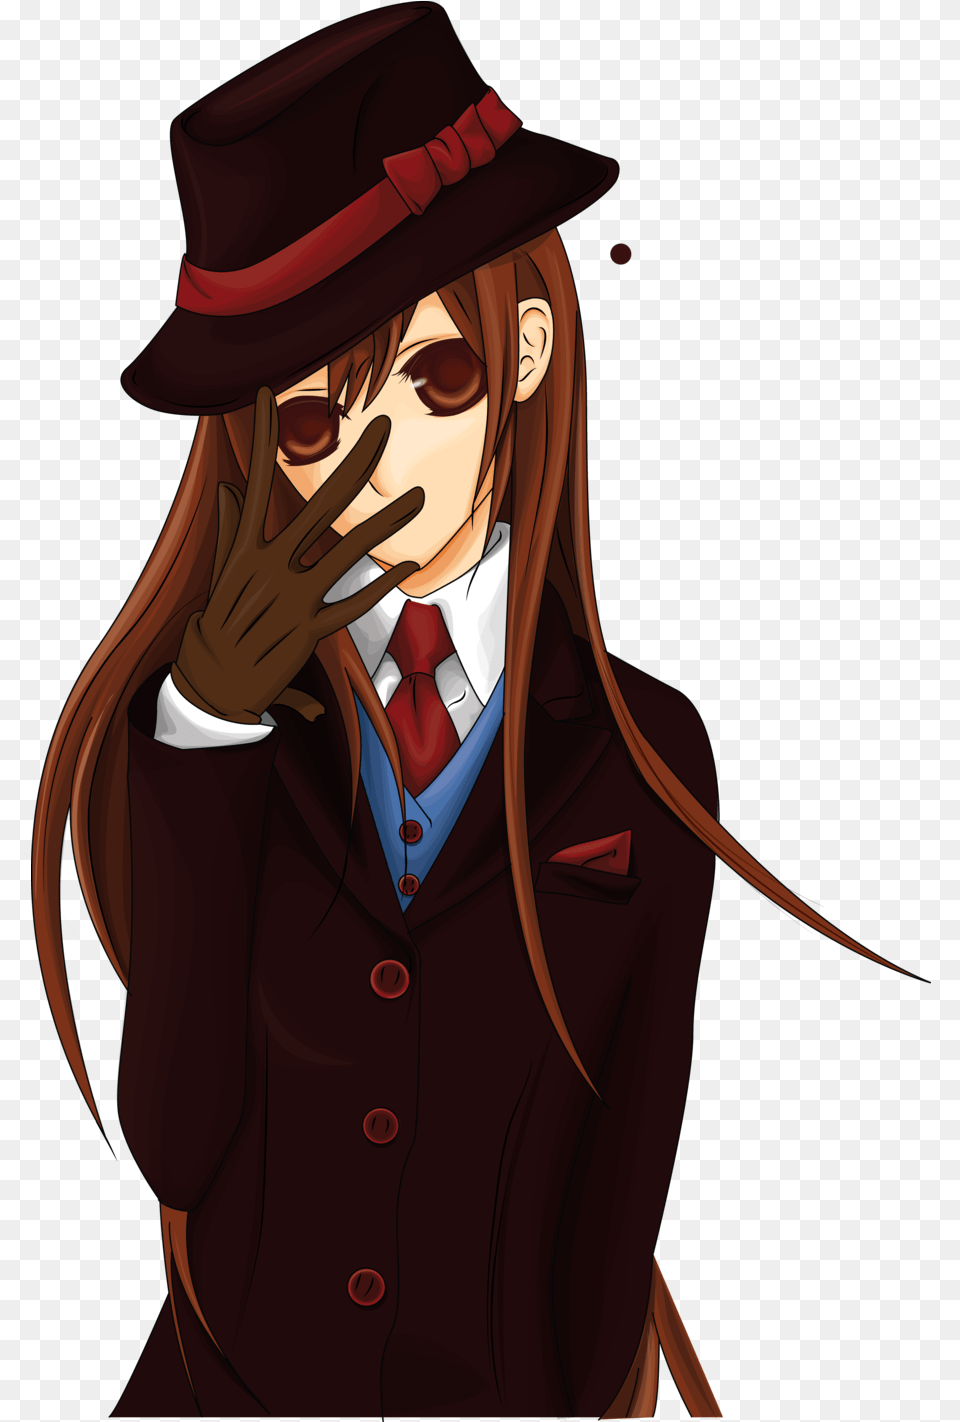 Download Anime Gangster Gangsta Drawing Gangster Anime Anime Mafia Boss Girl, Book, Comics, Publication, Adult Free Png